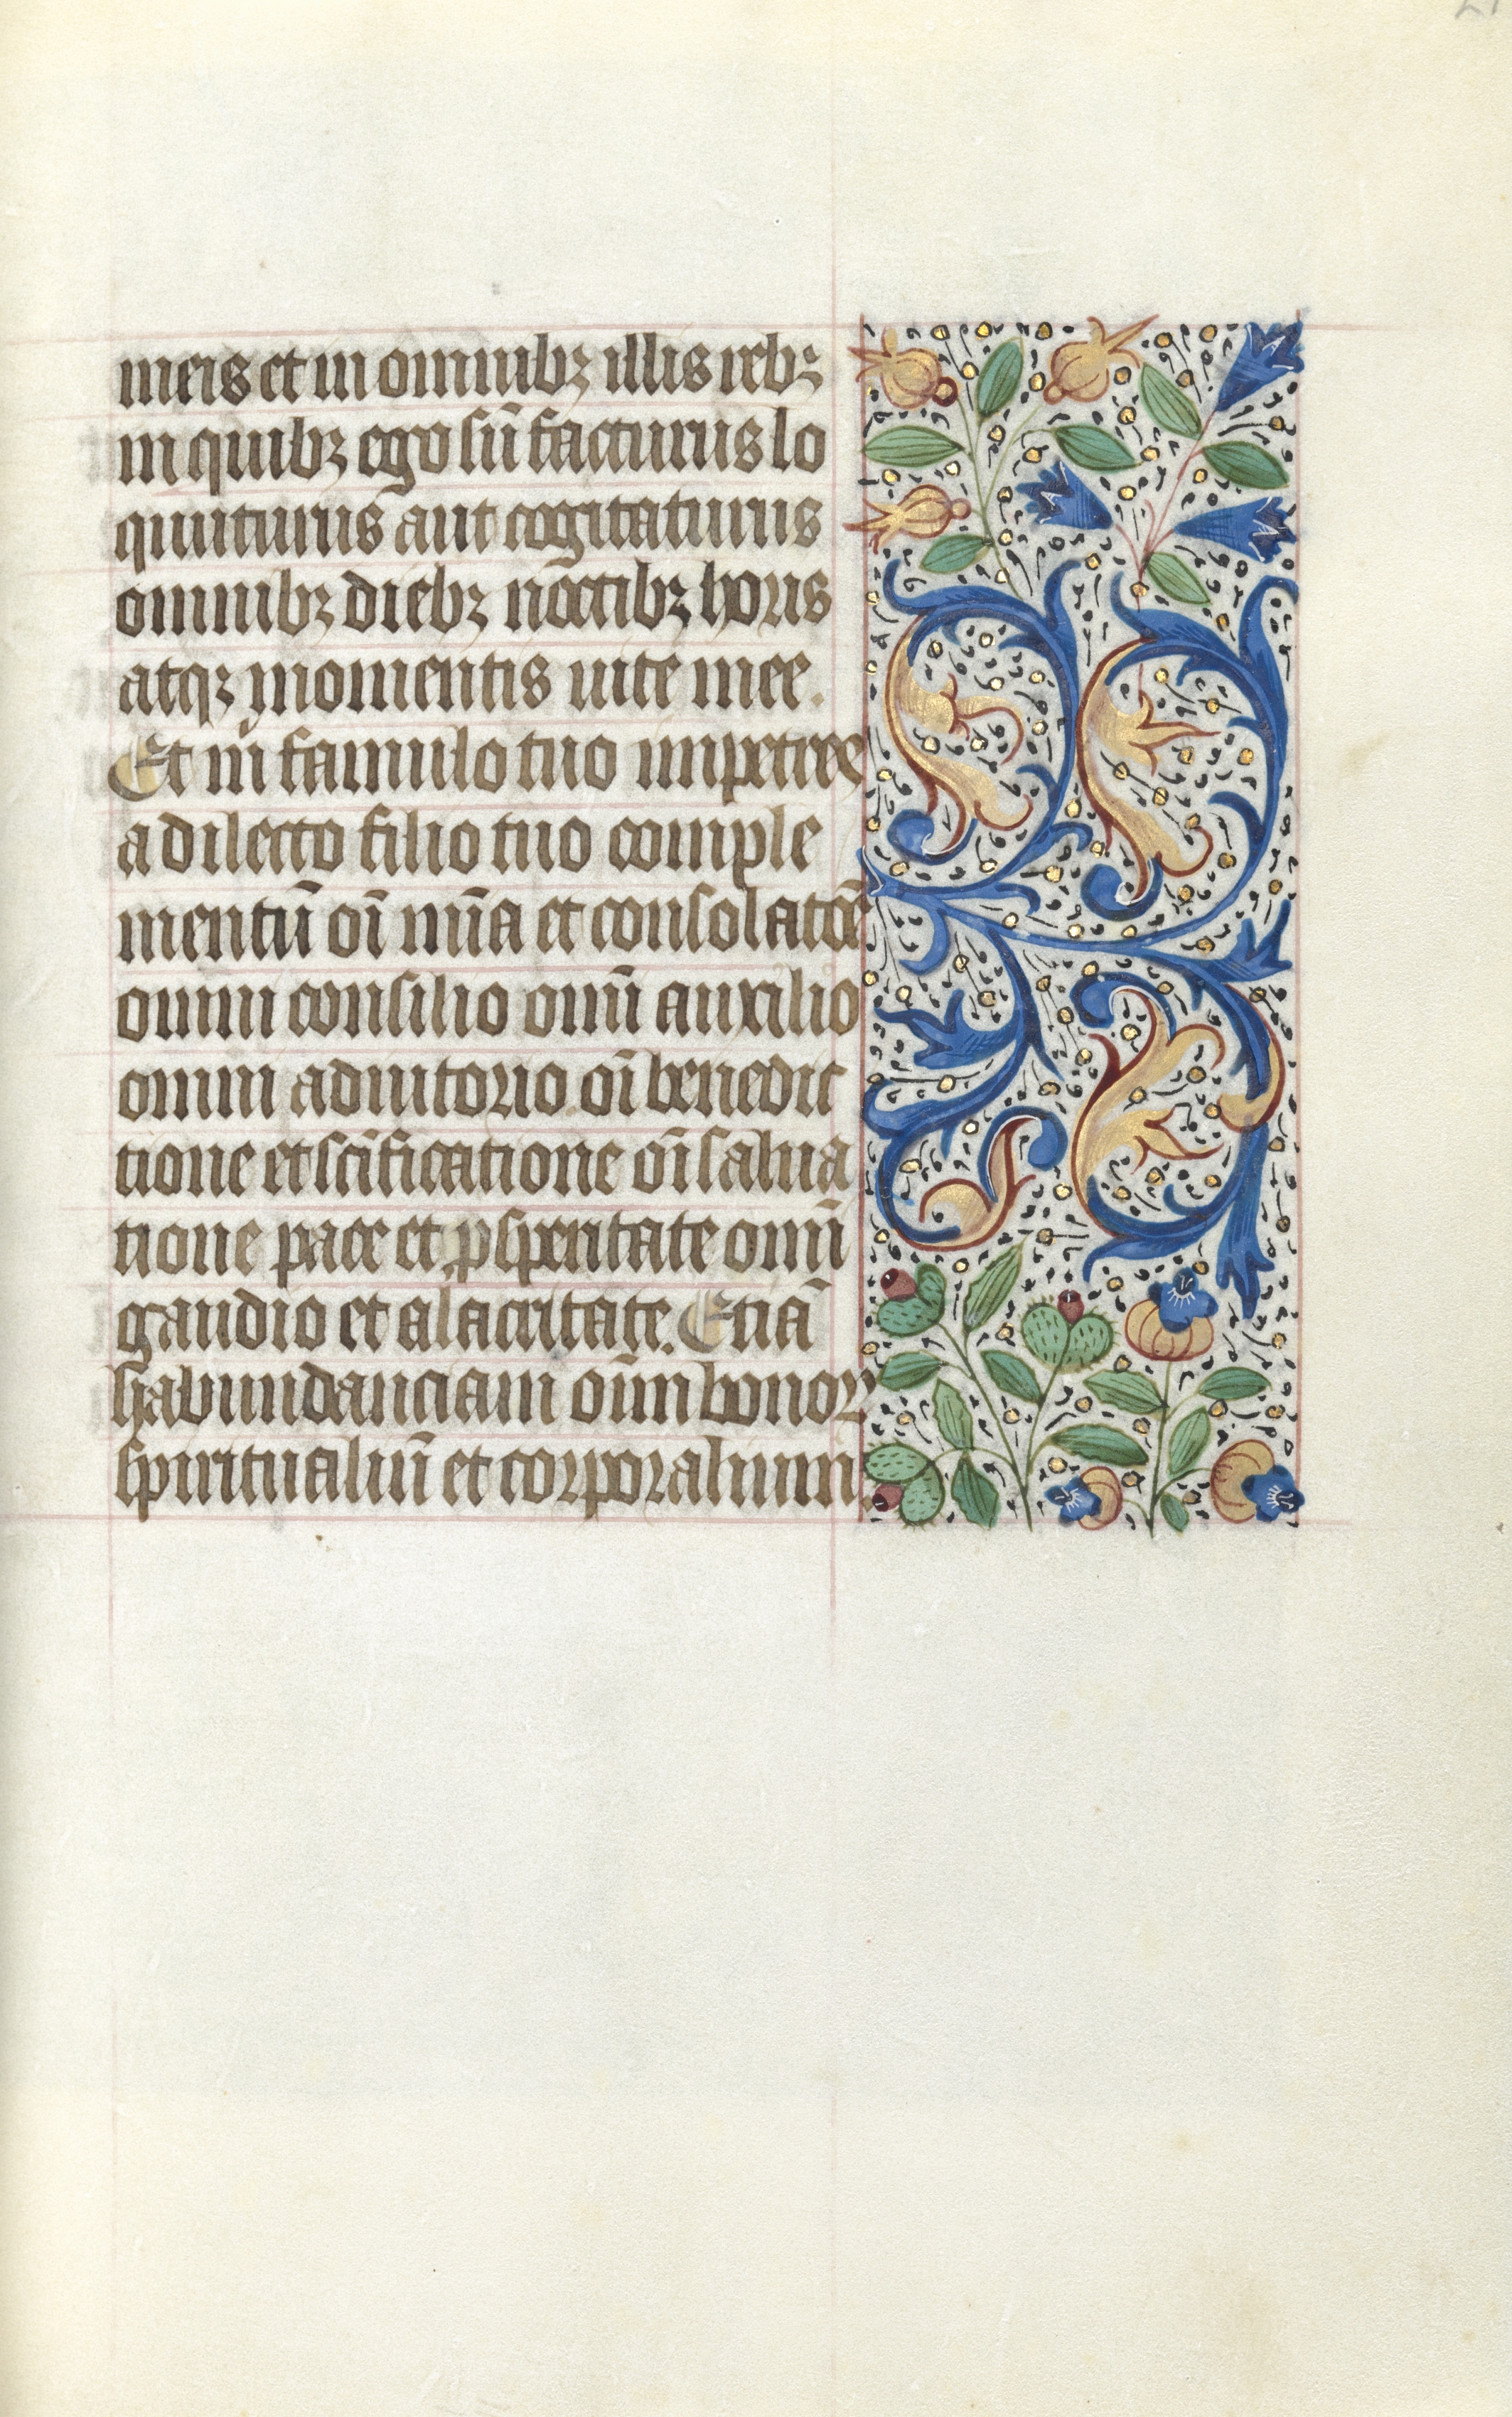 Book of Hours (Use of Rouen): fol. 21r